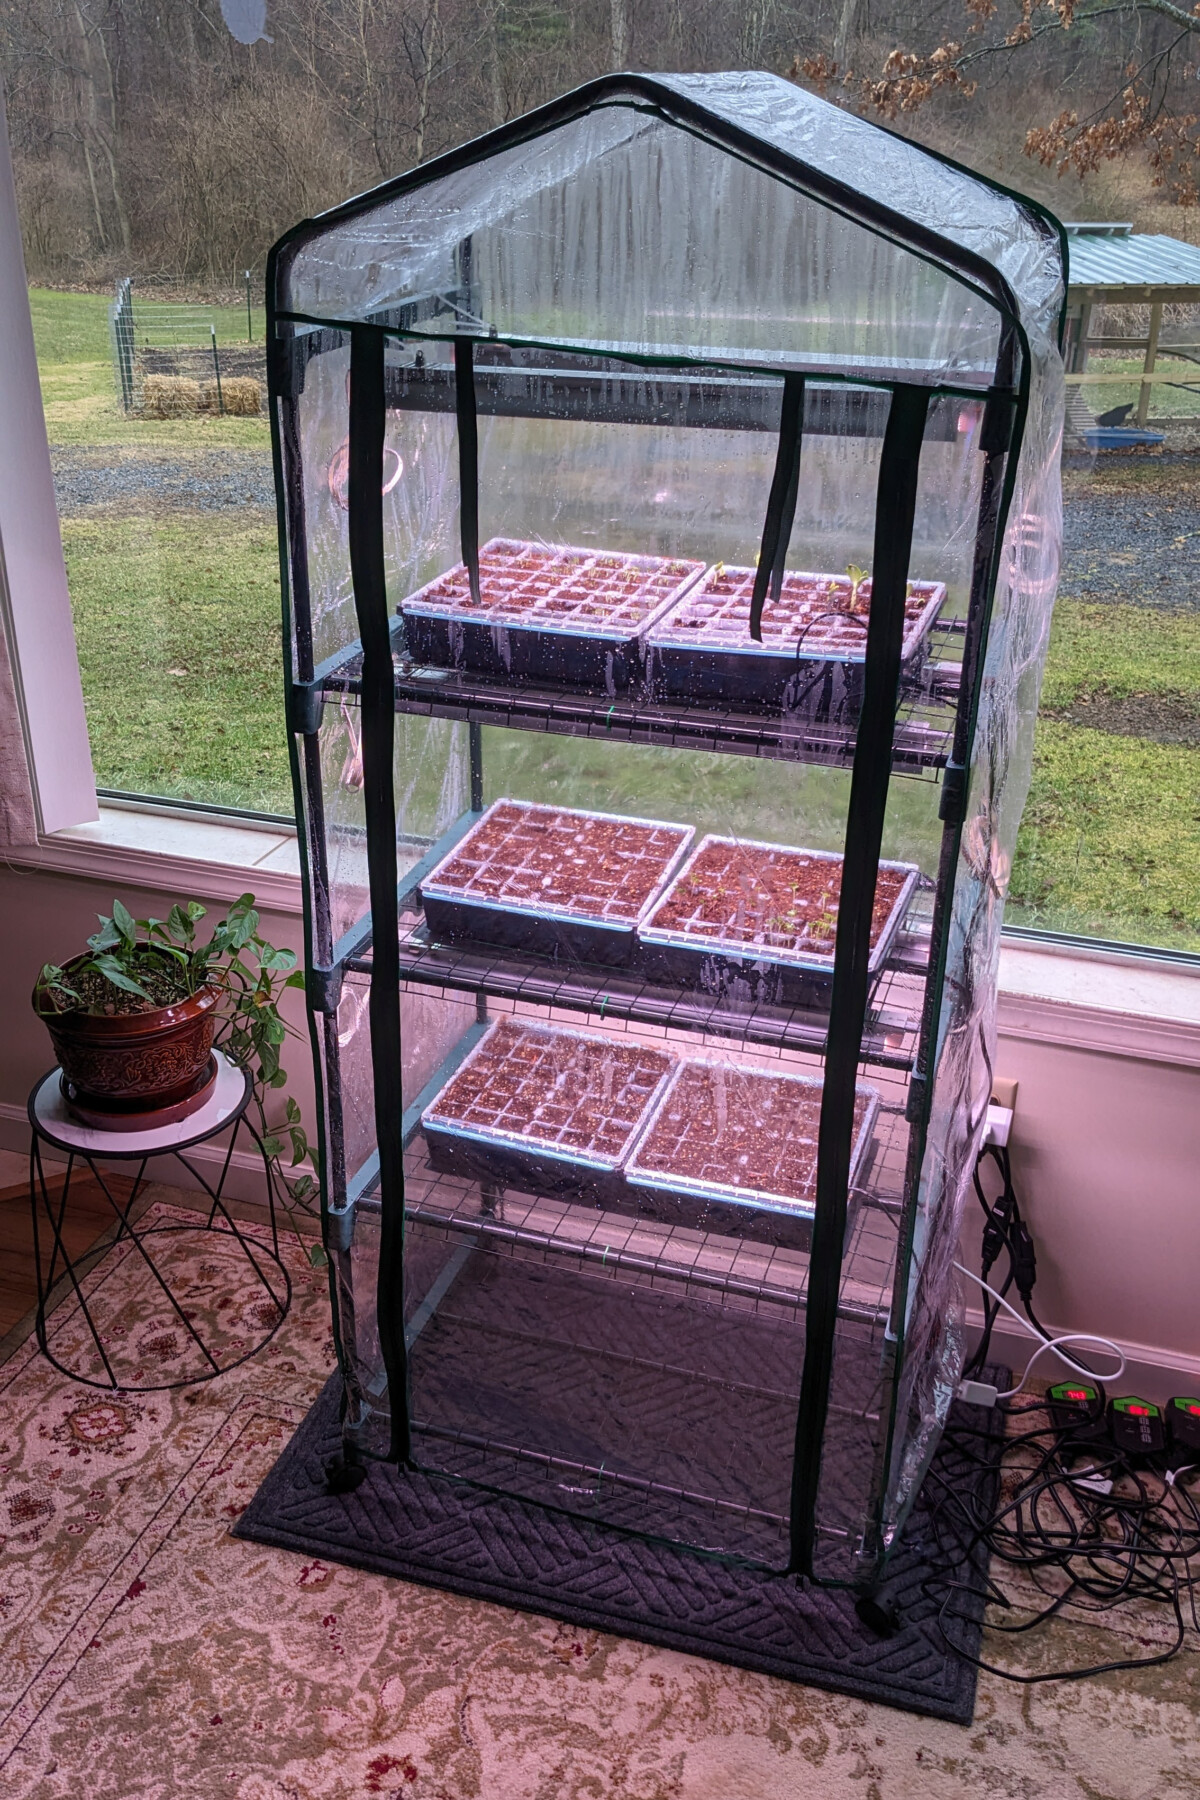 Small indoor greenhouse with seedlings in trays